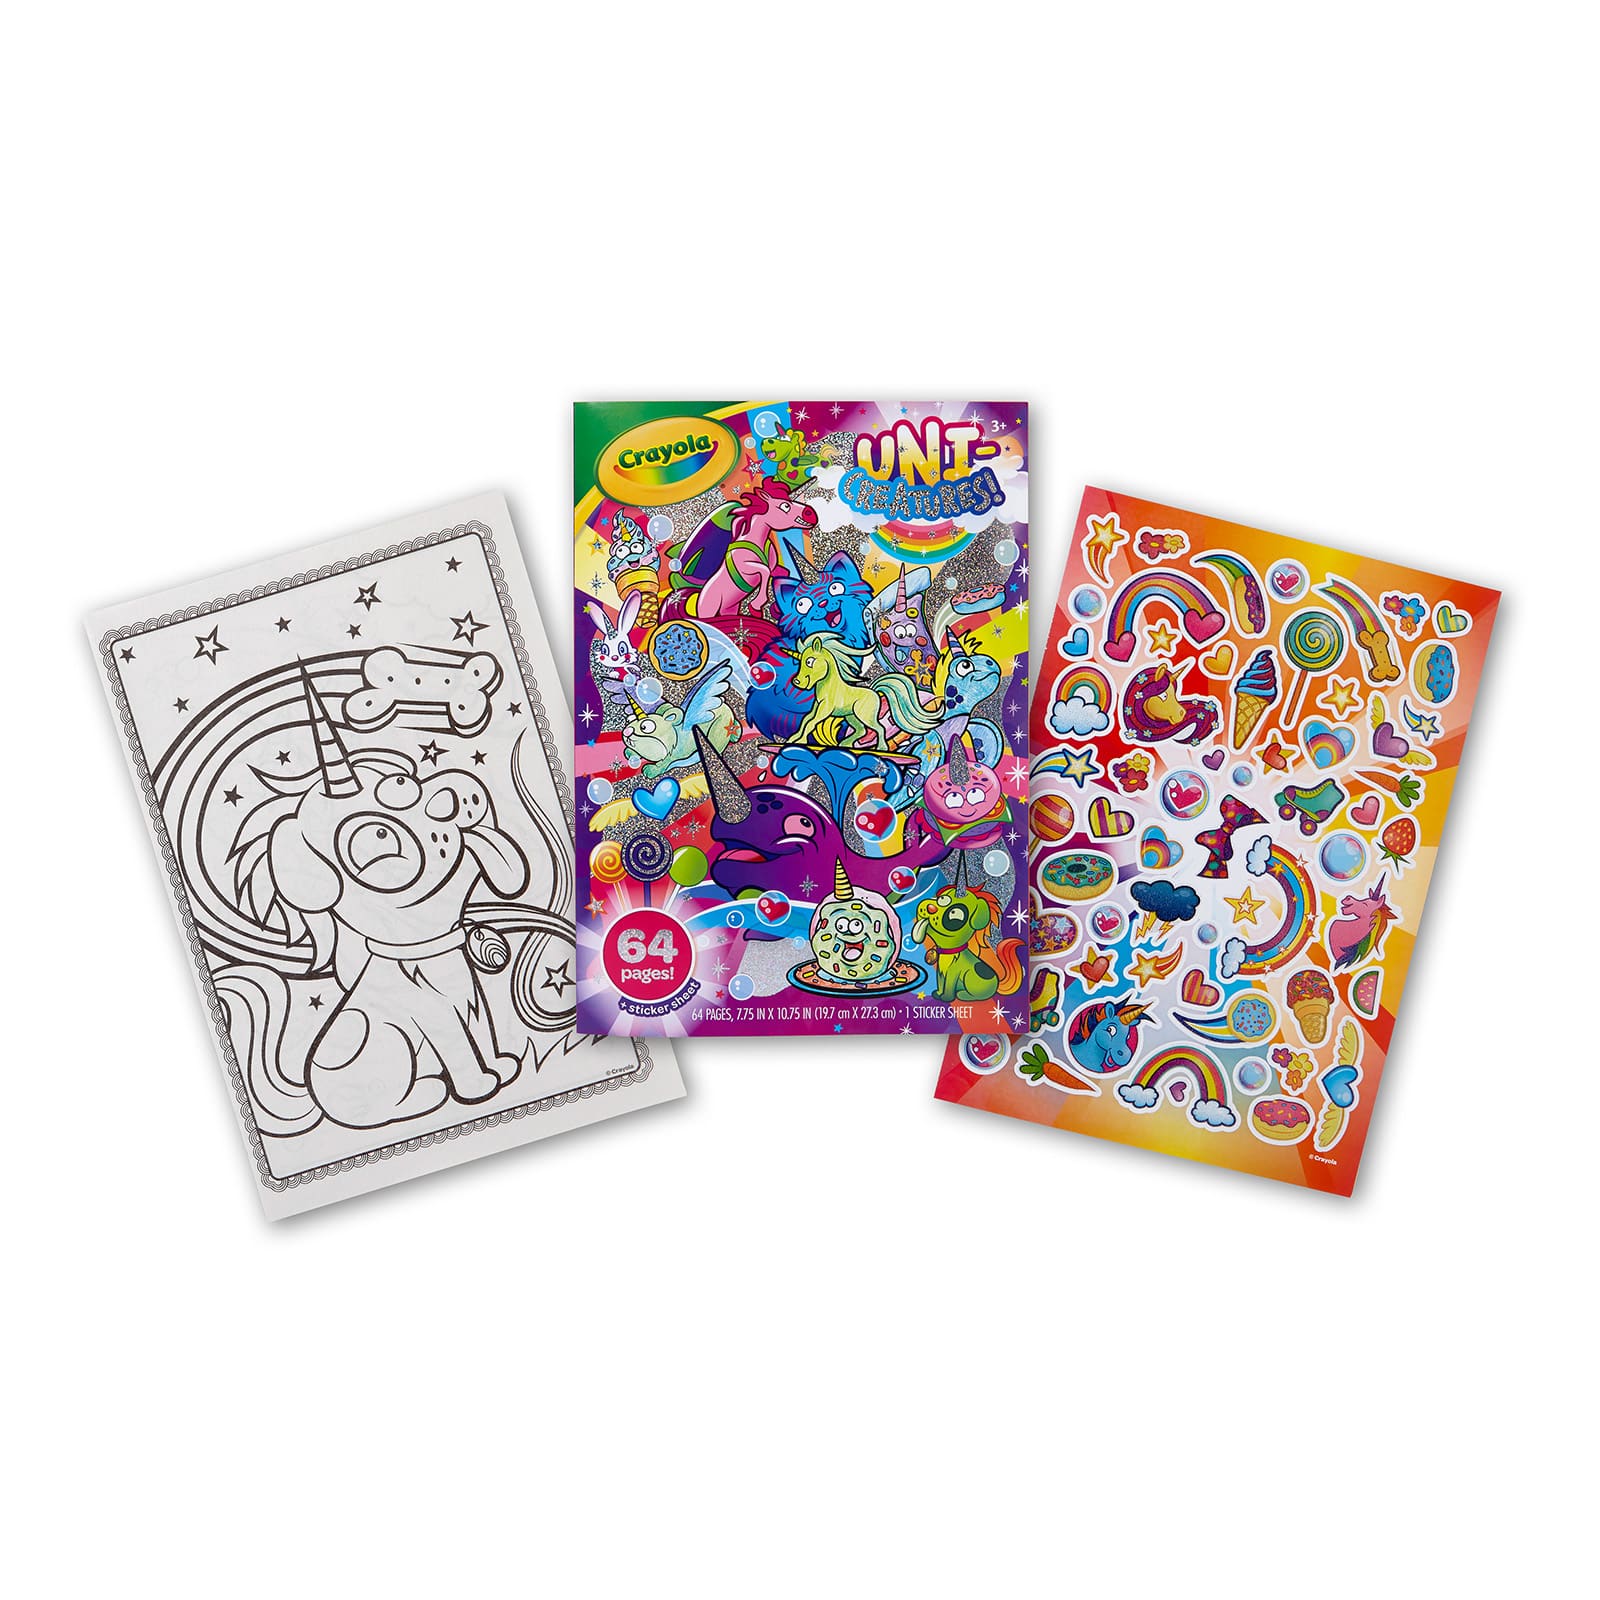 Download Shop for the Crayola® Uni-Creatures! Coloring Book at Michaels